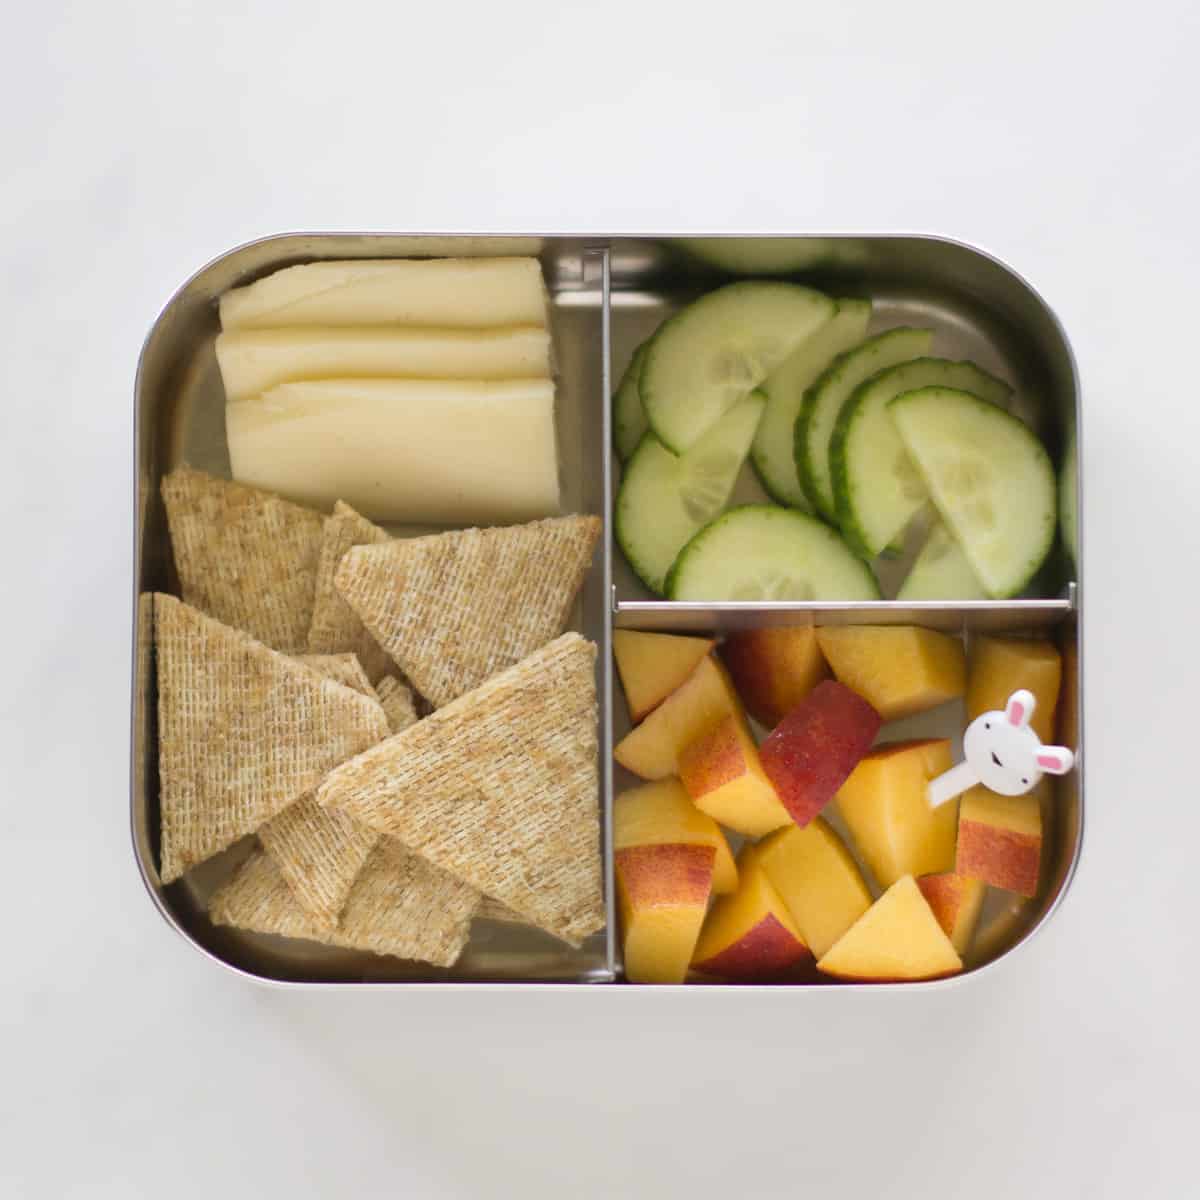 Crackers and cheese lunch box.